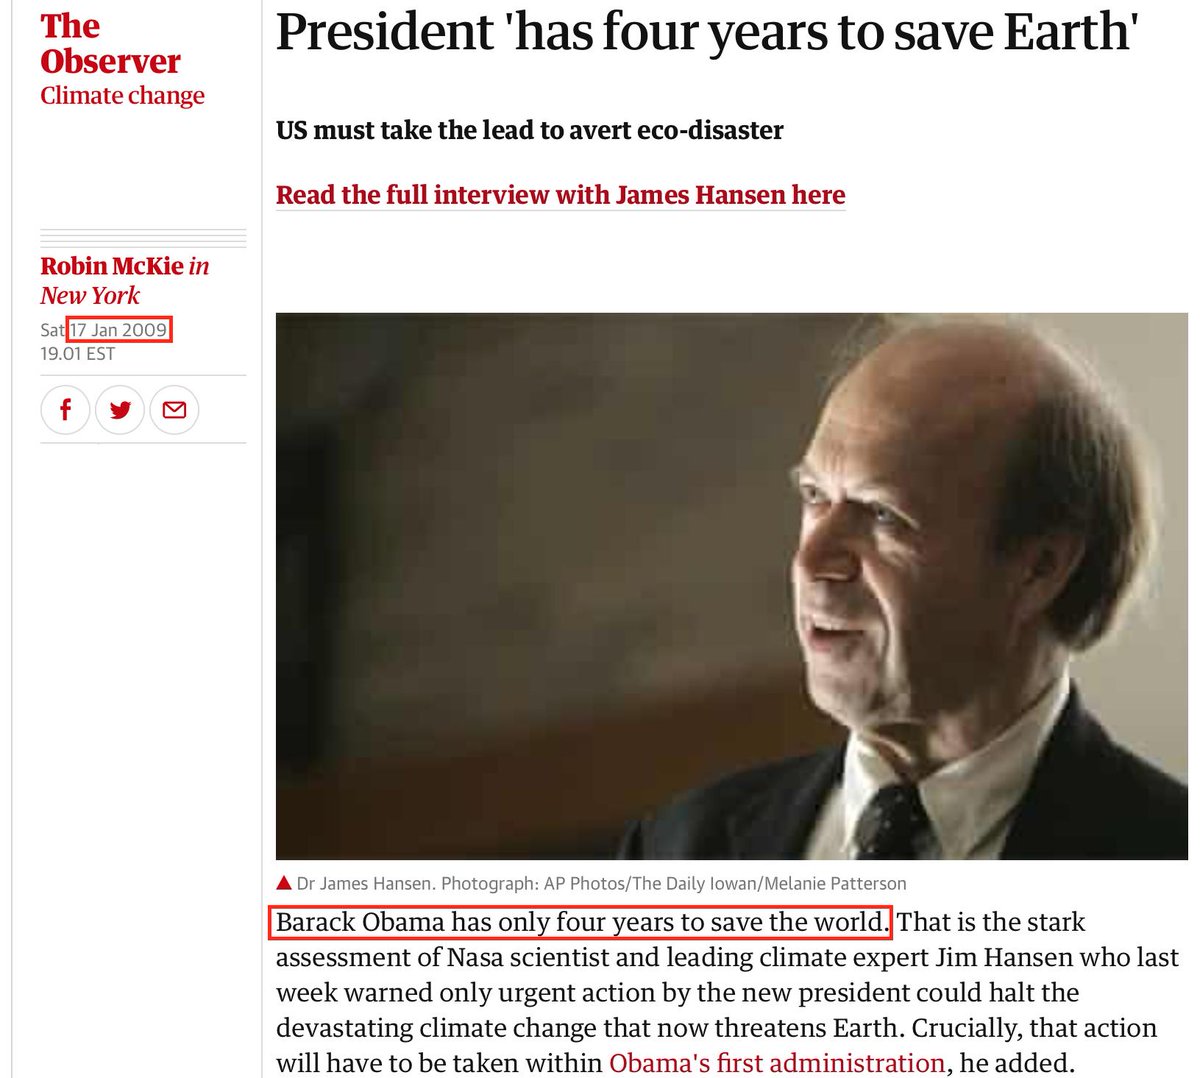 72. Although, Obama was only given 4 years to save Earth from climate change in 2009. https://www.theguardian.com/environment/2009/jan/18/jim-hansen-obama